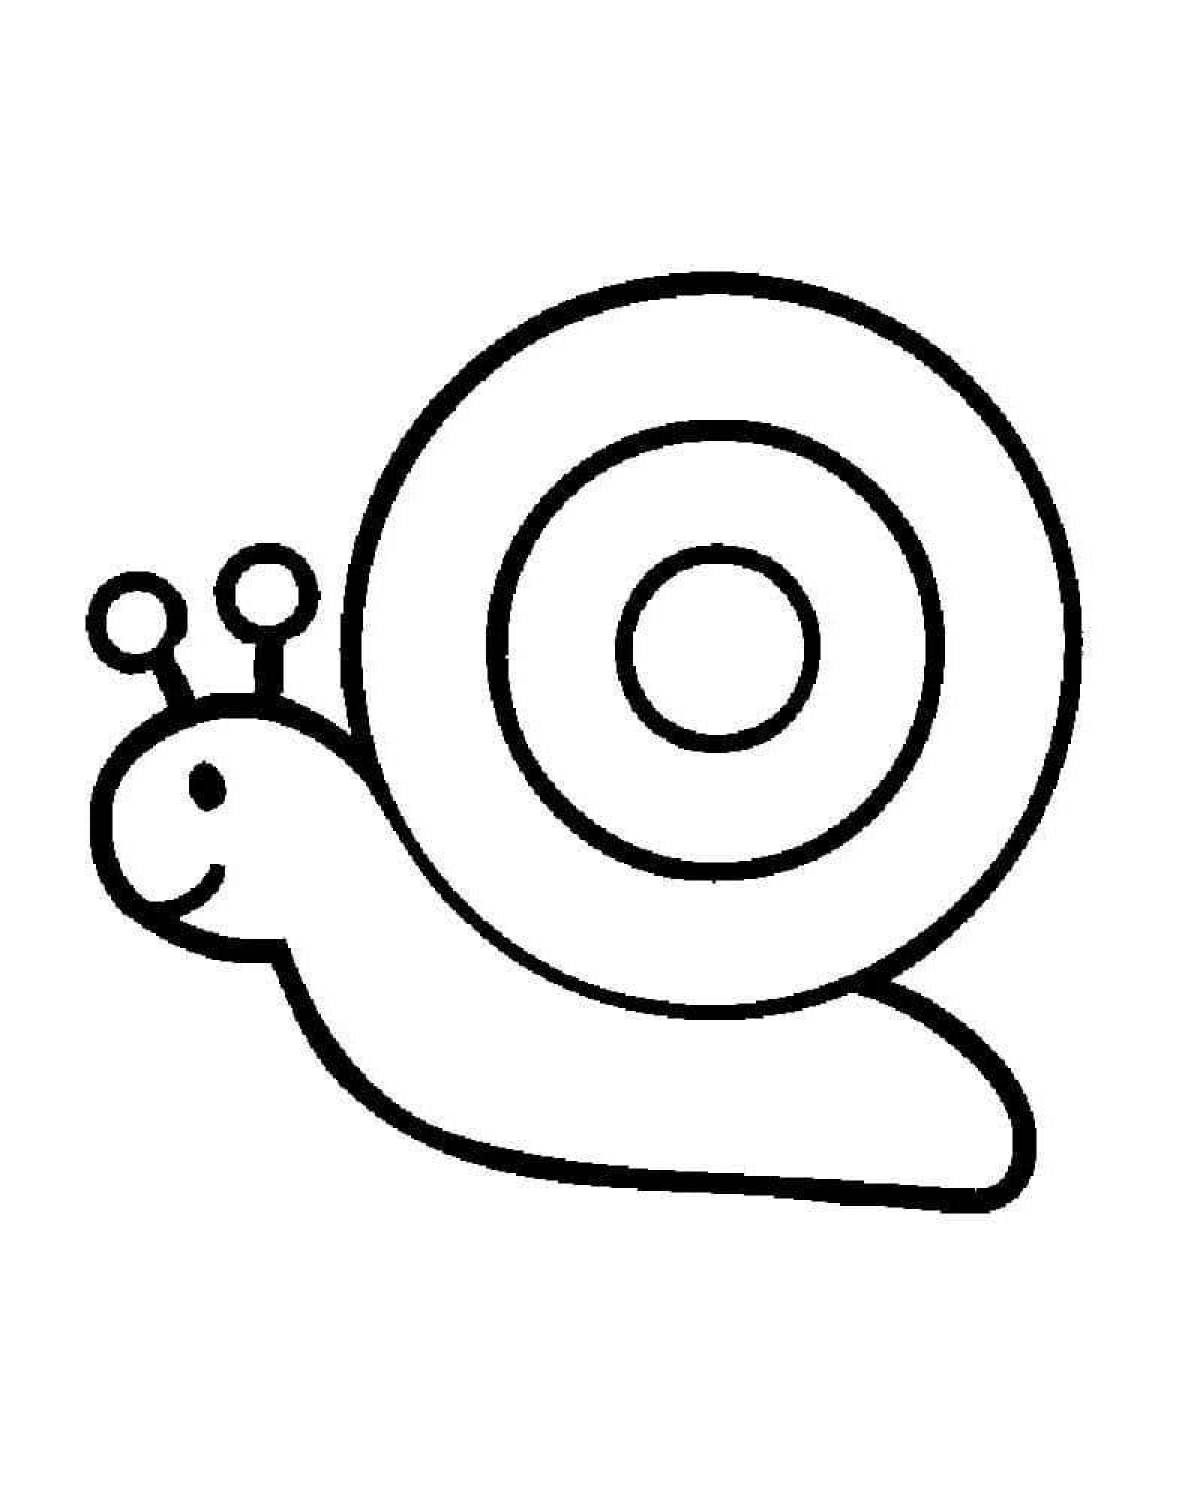 Coloring book shining snail for kids